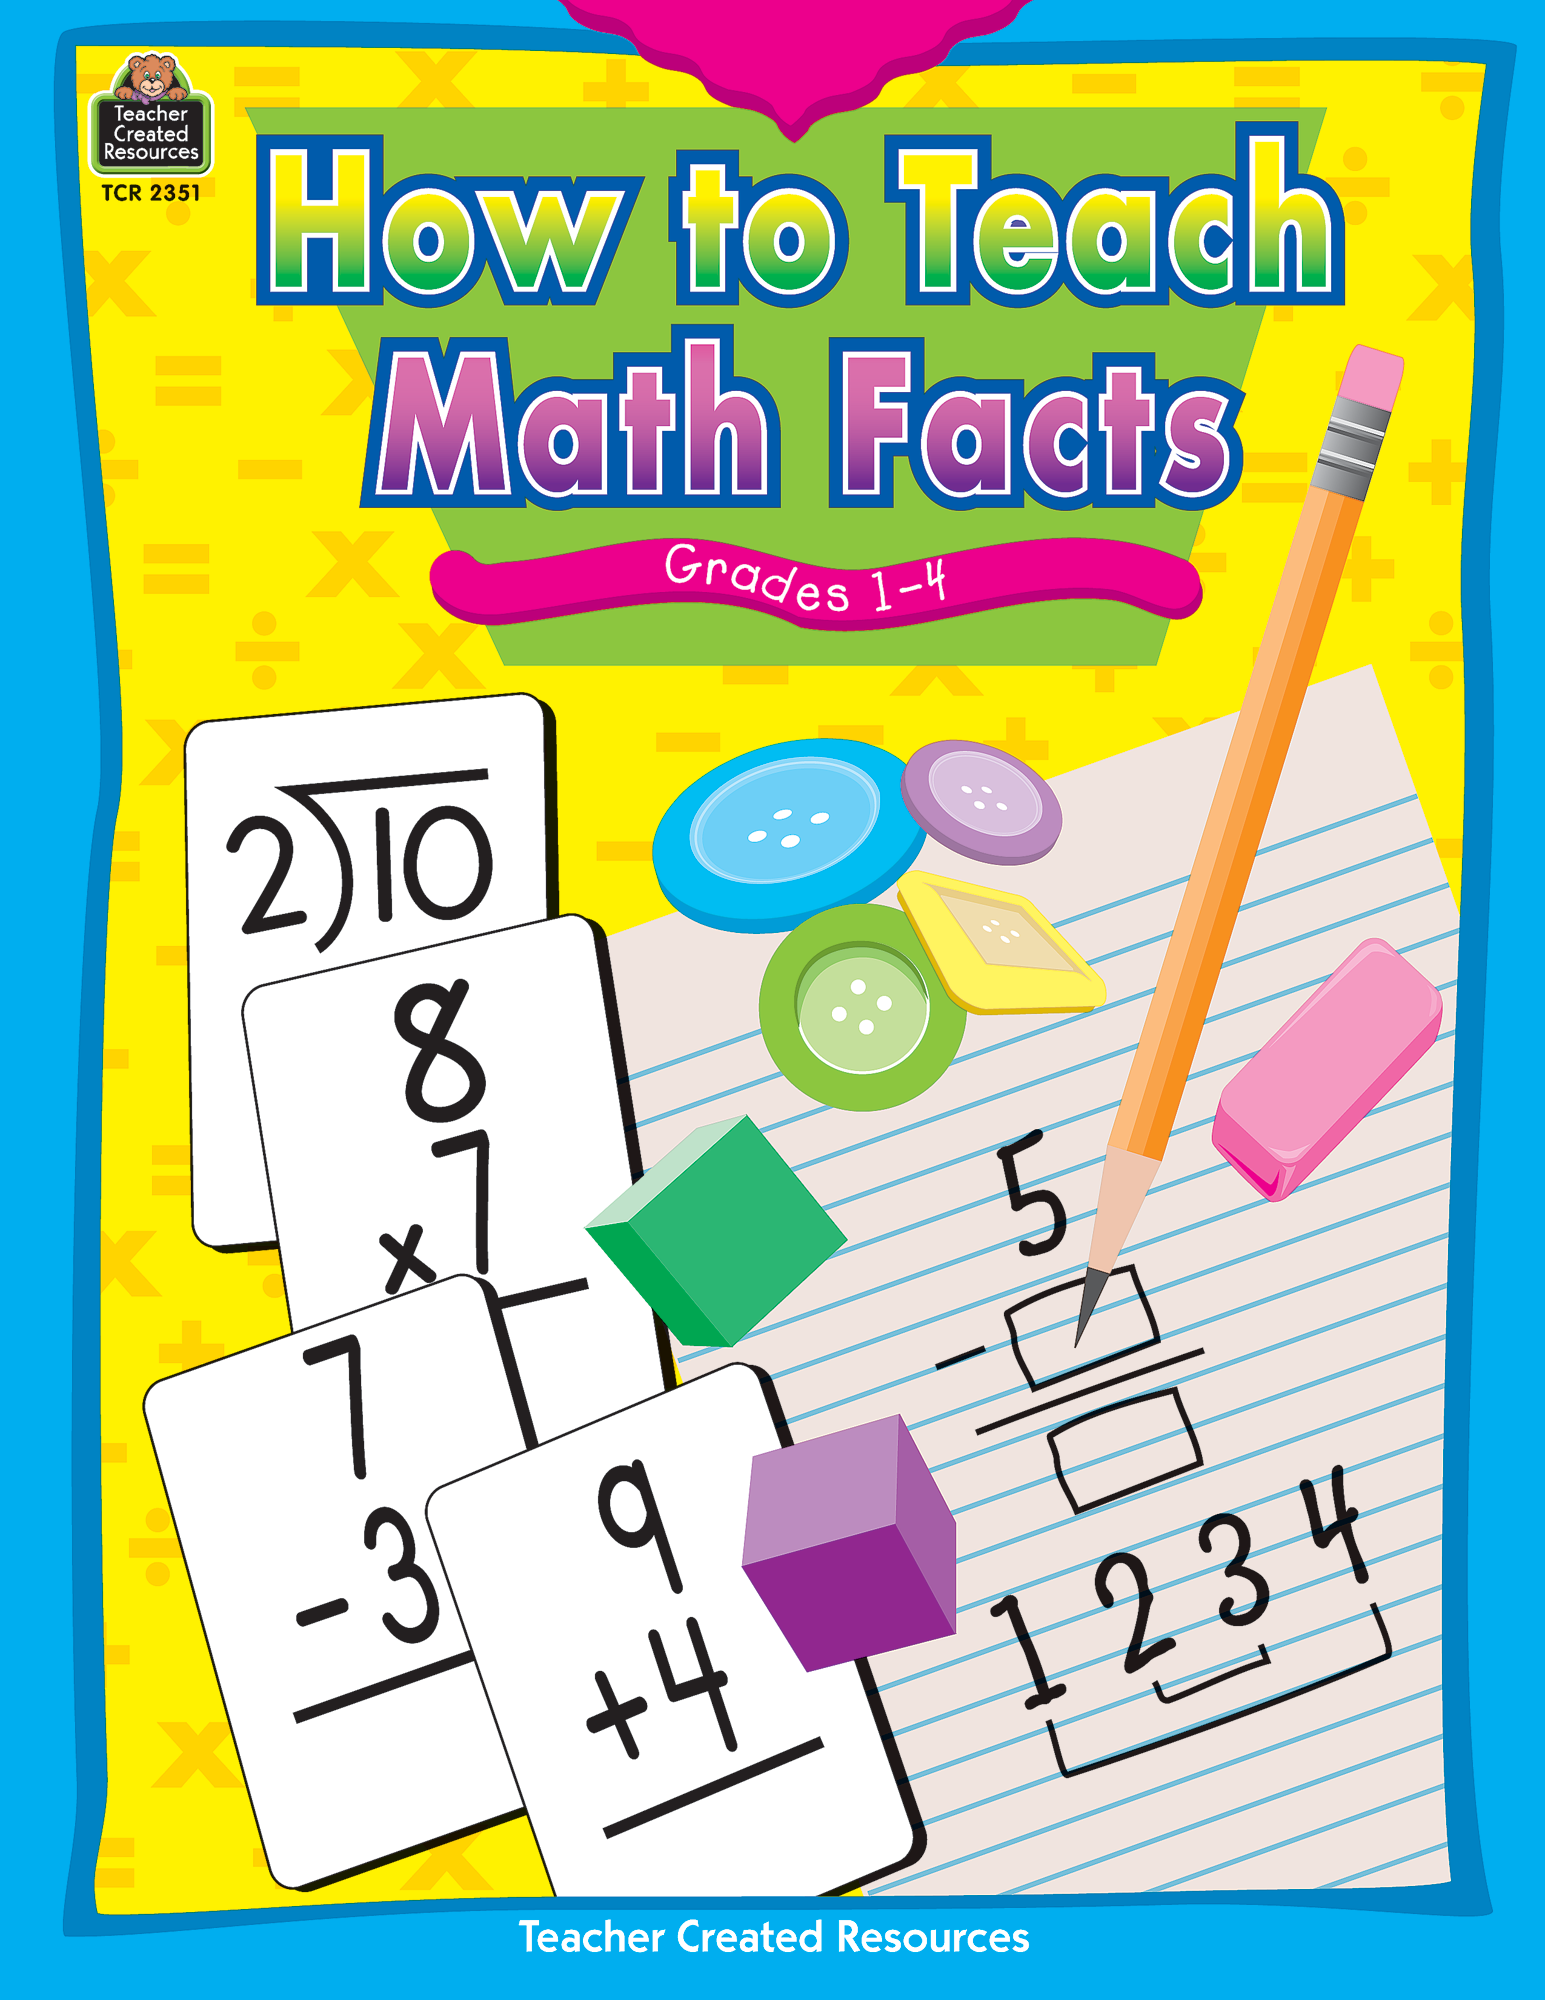 How to Teach Math Facts Grade 1-4 - TCR2351 | Teacher Created Resources